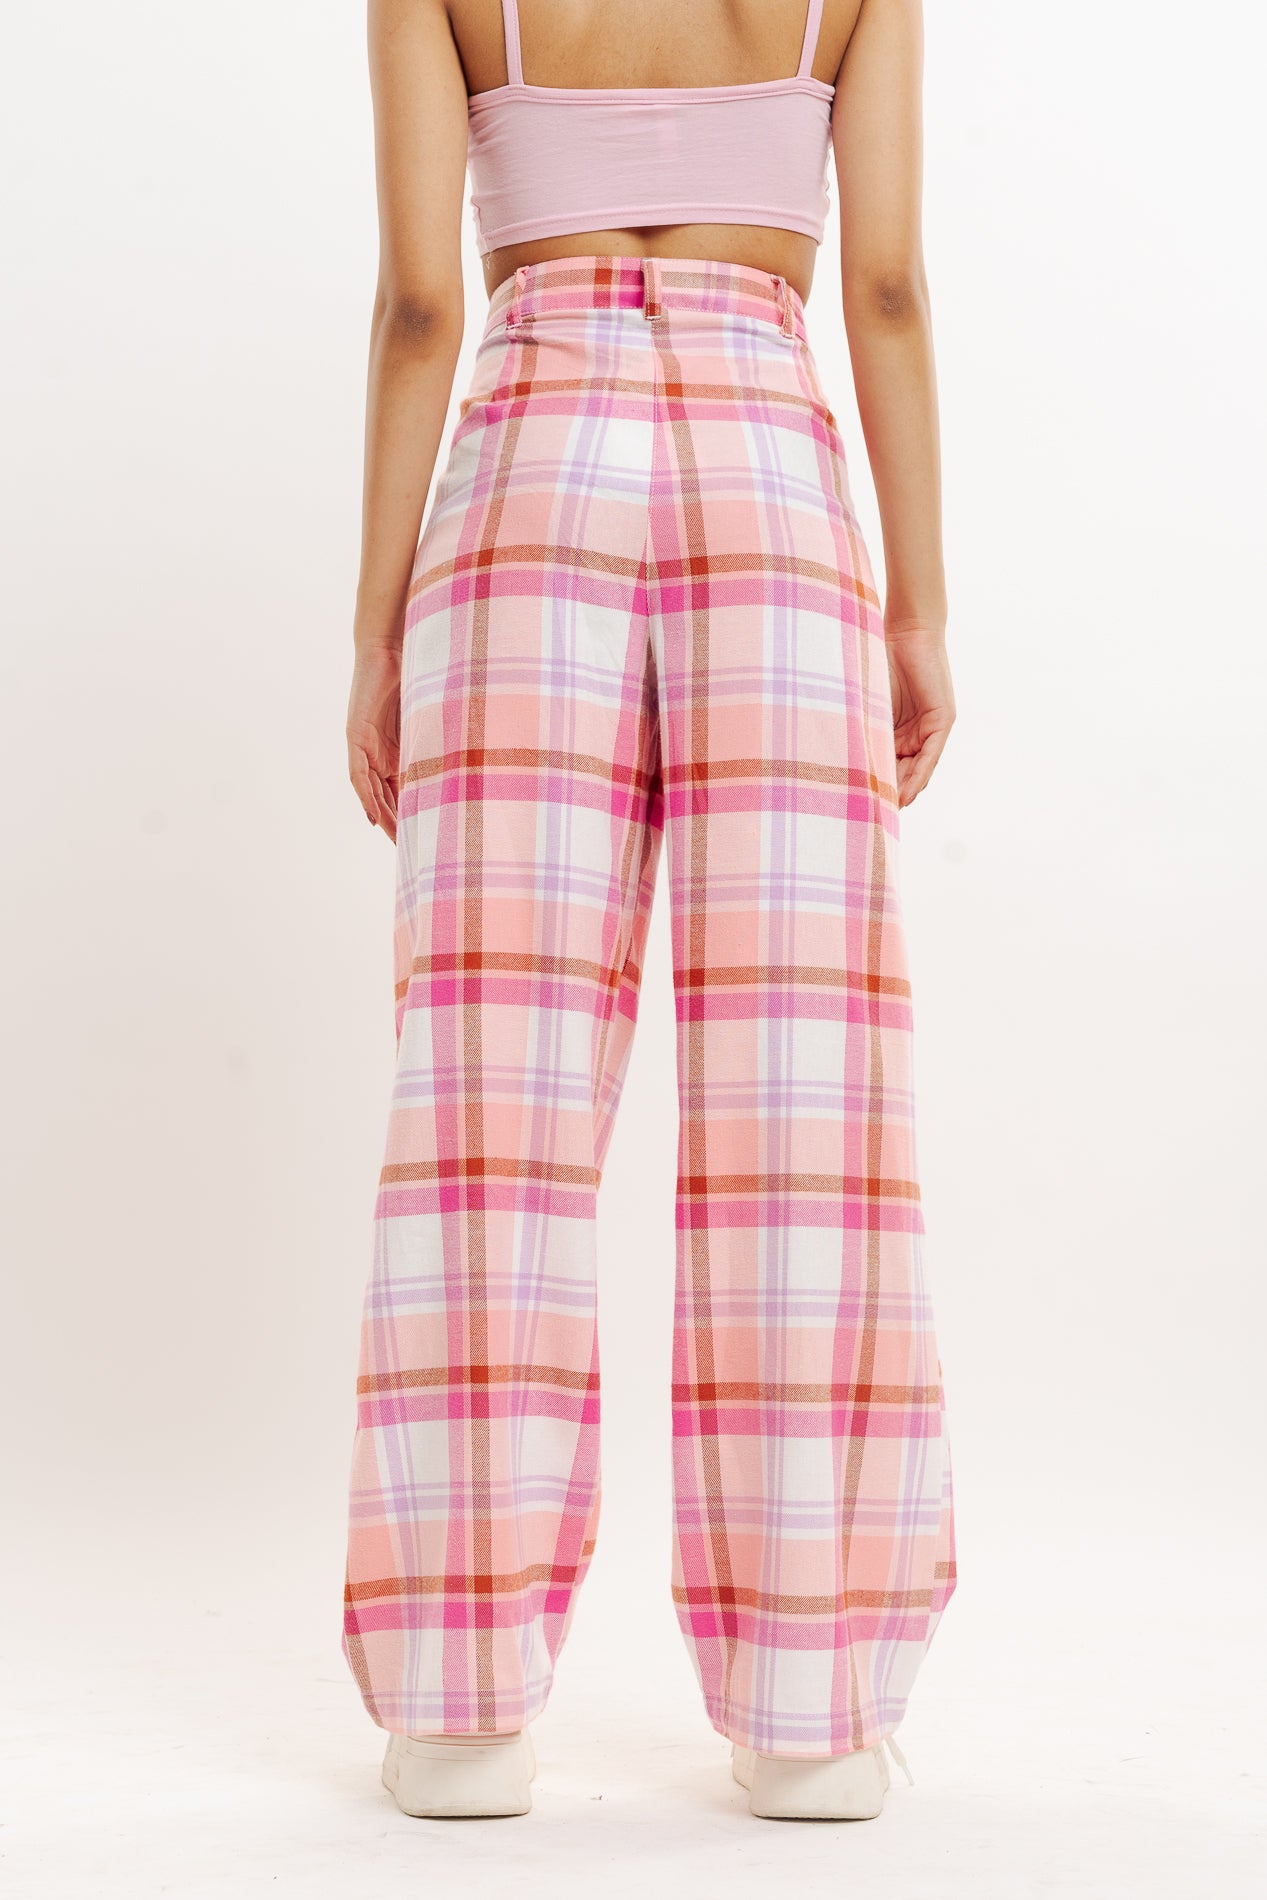 PINK AND WHITE CHECKERED STRAIGHT FIT PANT